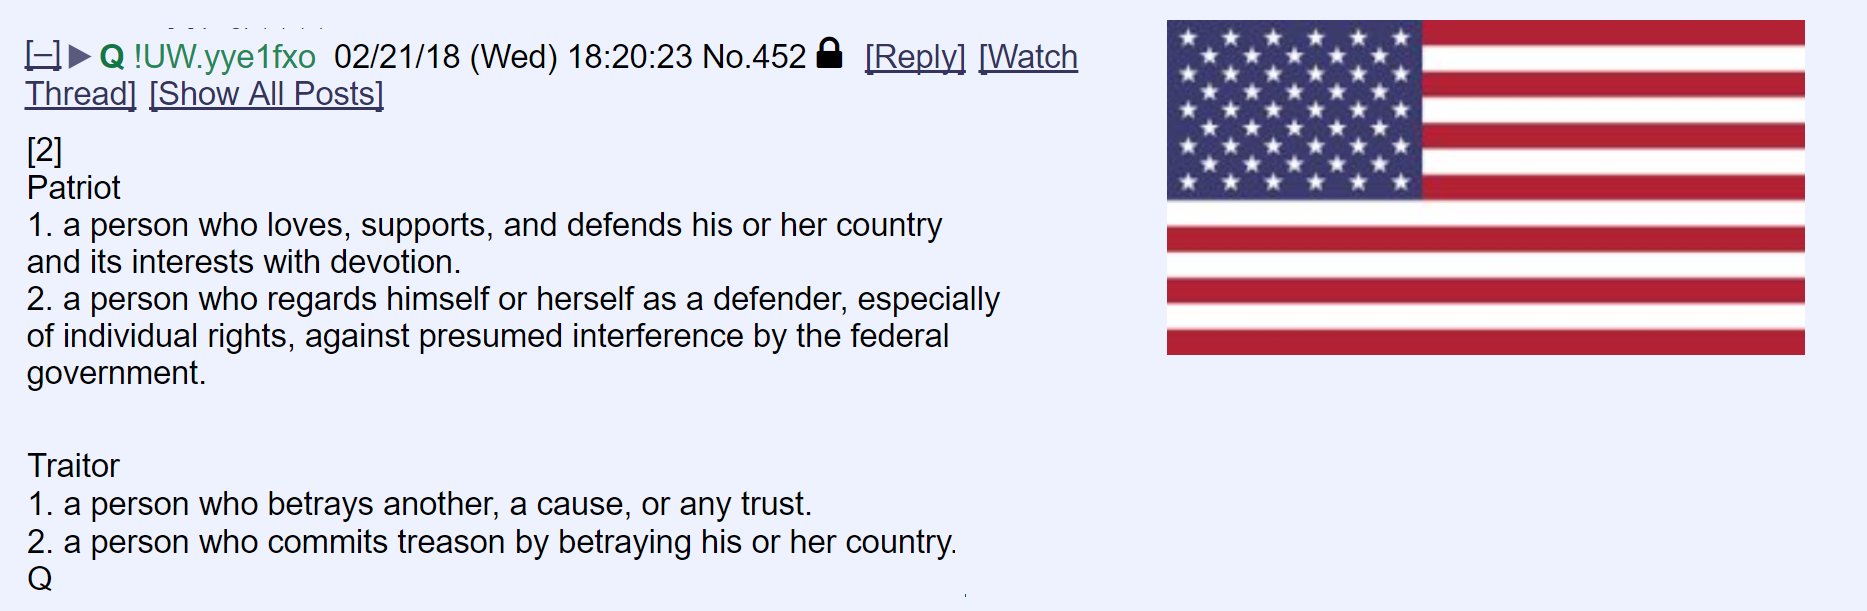 Forcin the Issue, SIR. WHO IS Q QANON? #ALLFORALARP> No1 will ask will they, SIR?  GameOVA = PATRIOT DEFINITION vs TRAITOR DEFINITION